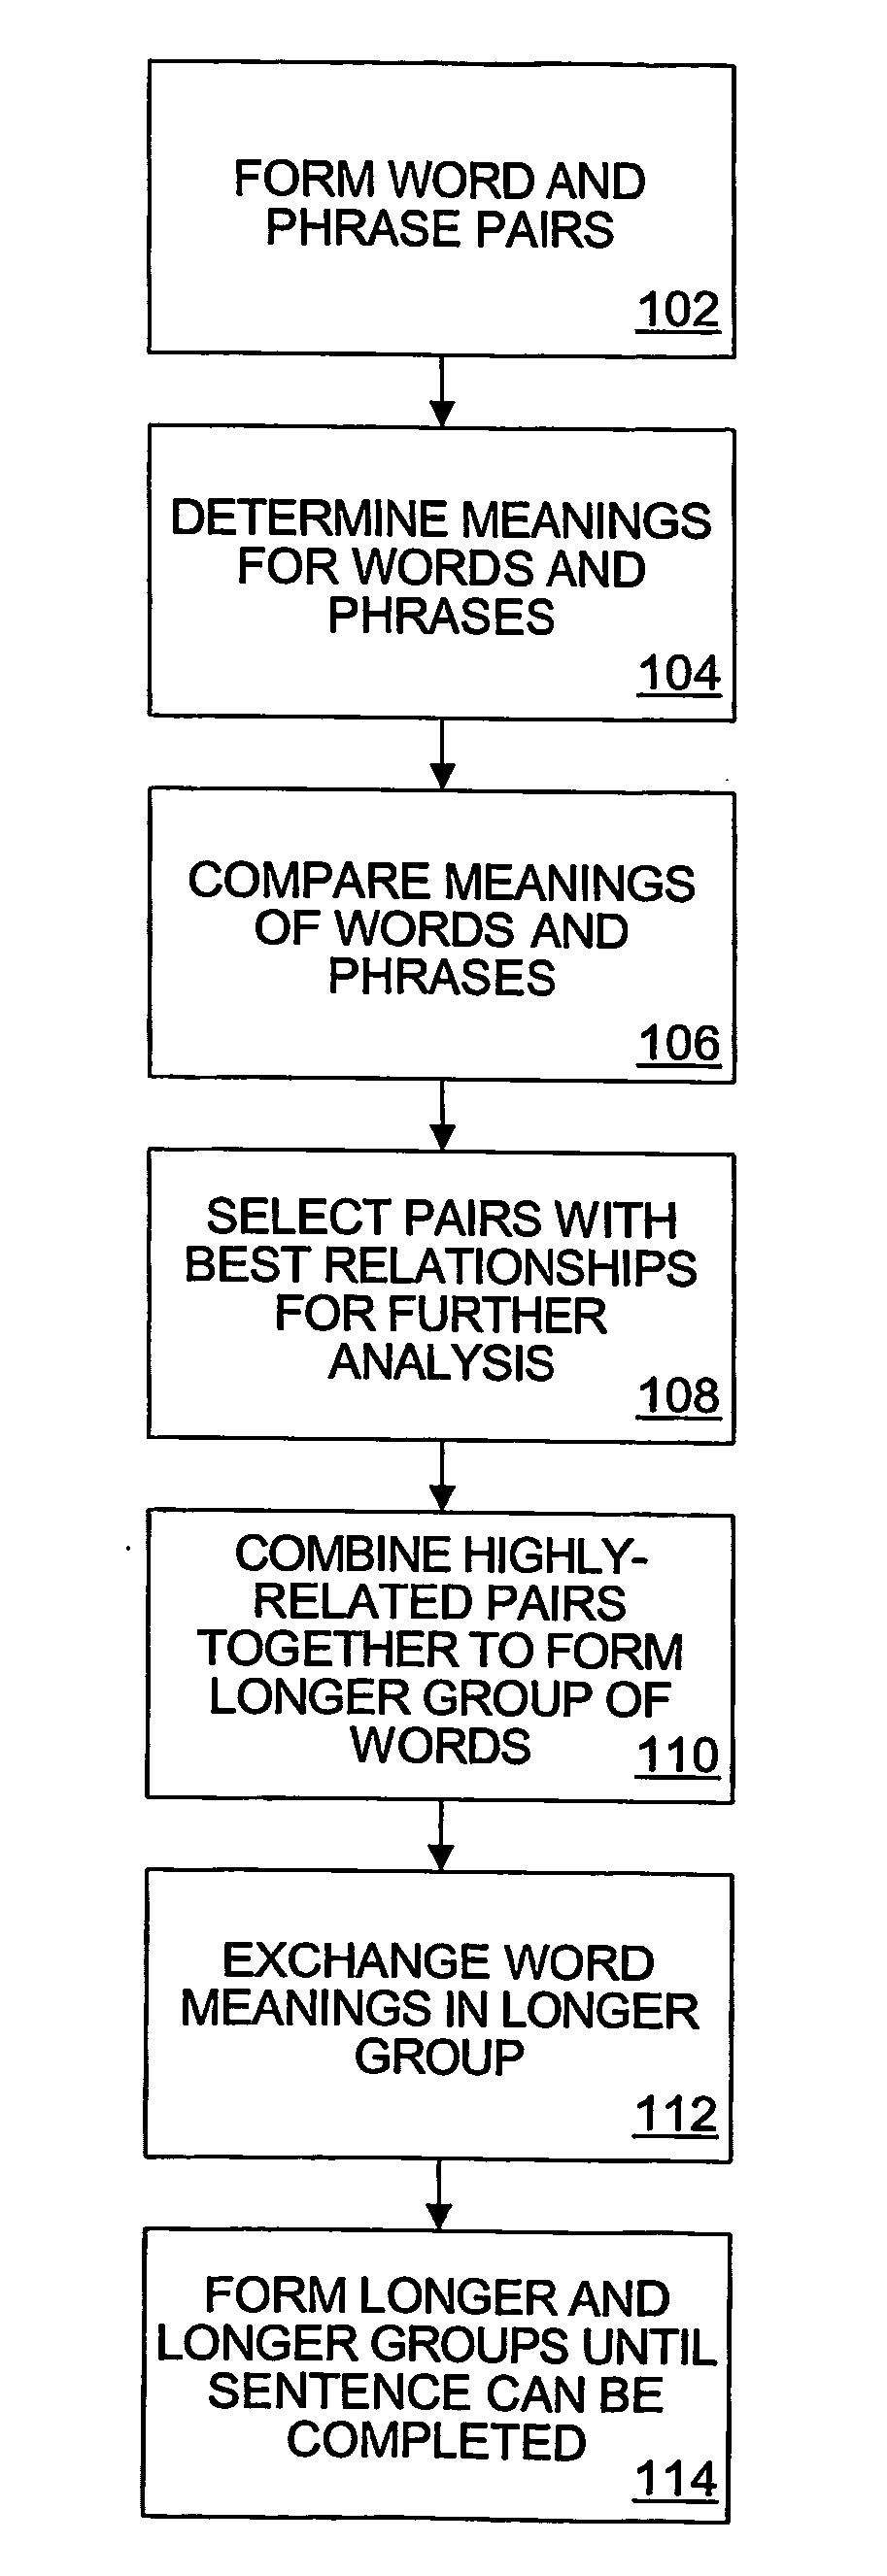 Relationship analysis system and method for semantic disambiguation of natural language